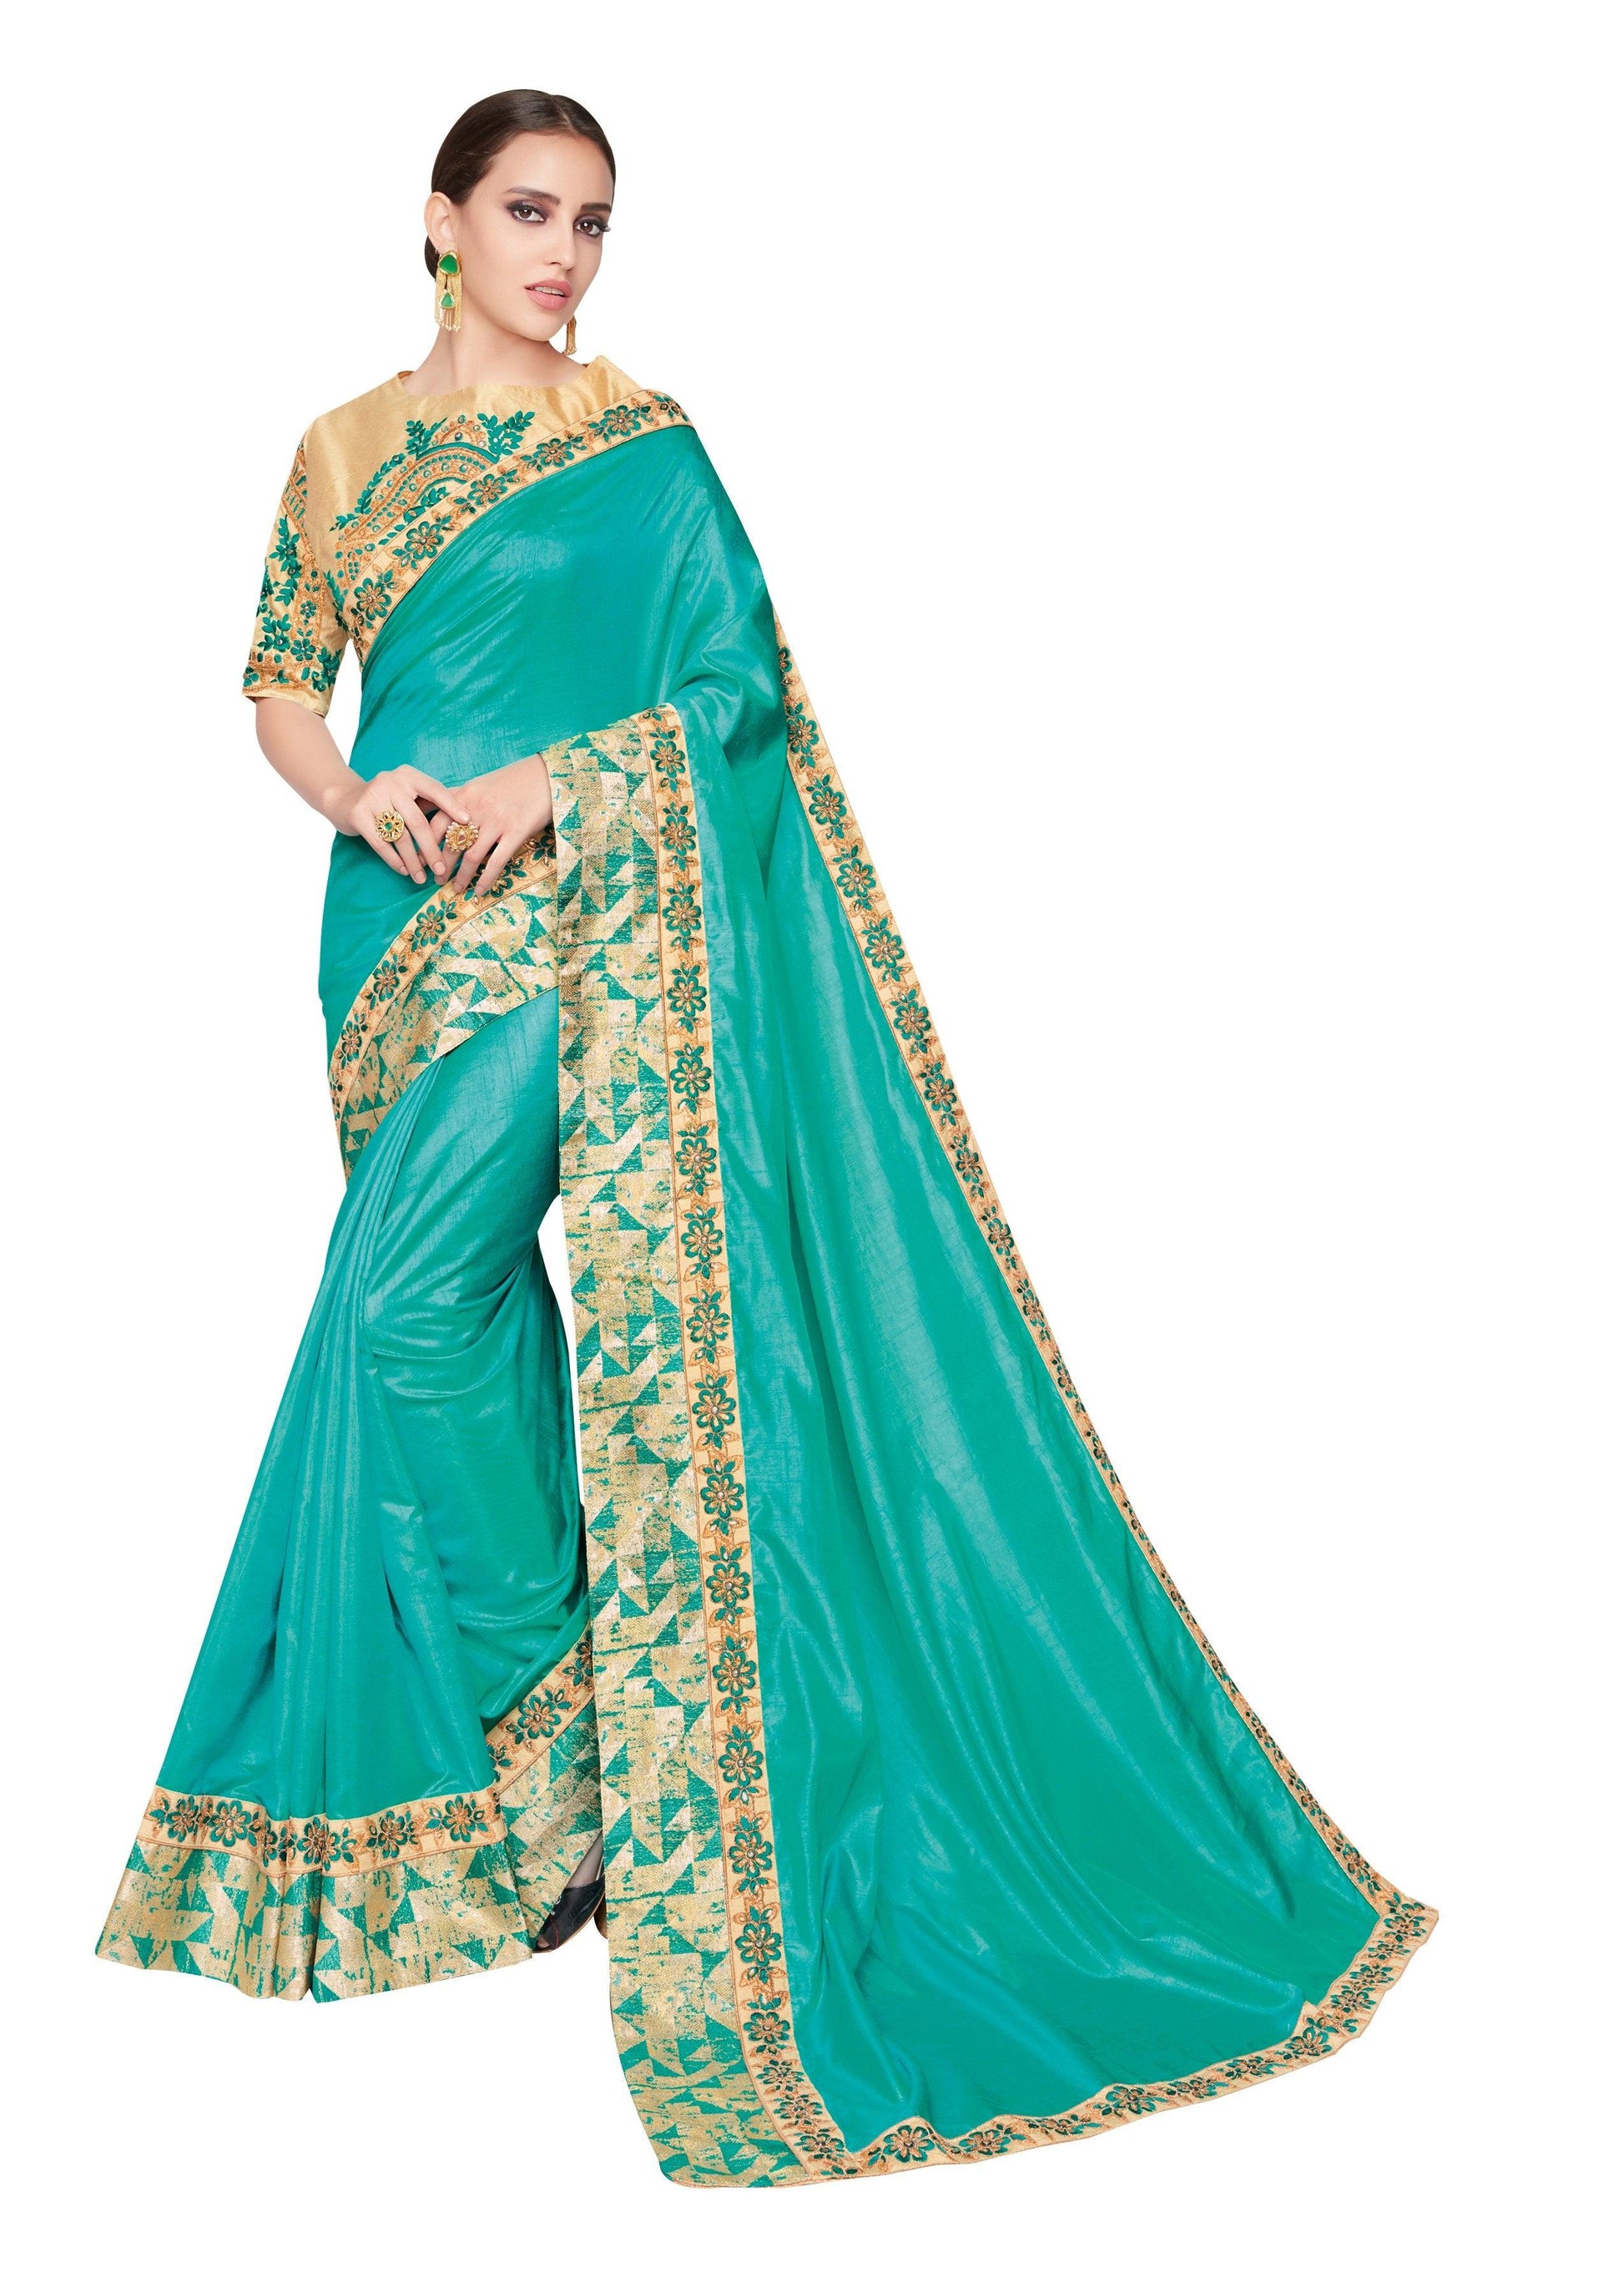 Designer Two Tone Turquoise Silk Border Saree with Semi Stitched Blouse MM12324-Anvi Creations-